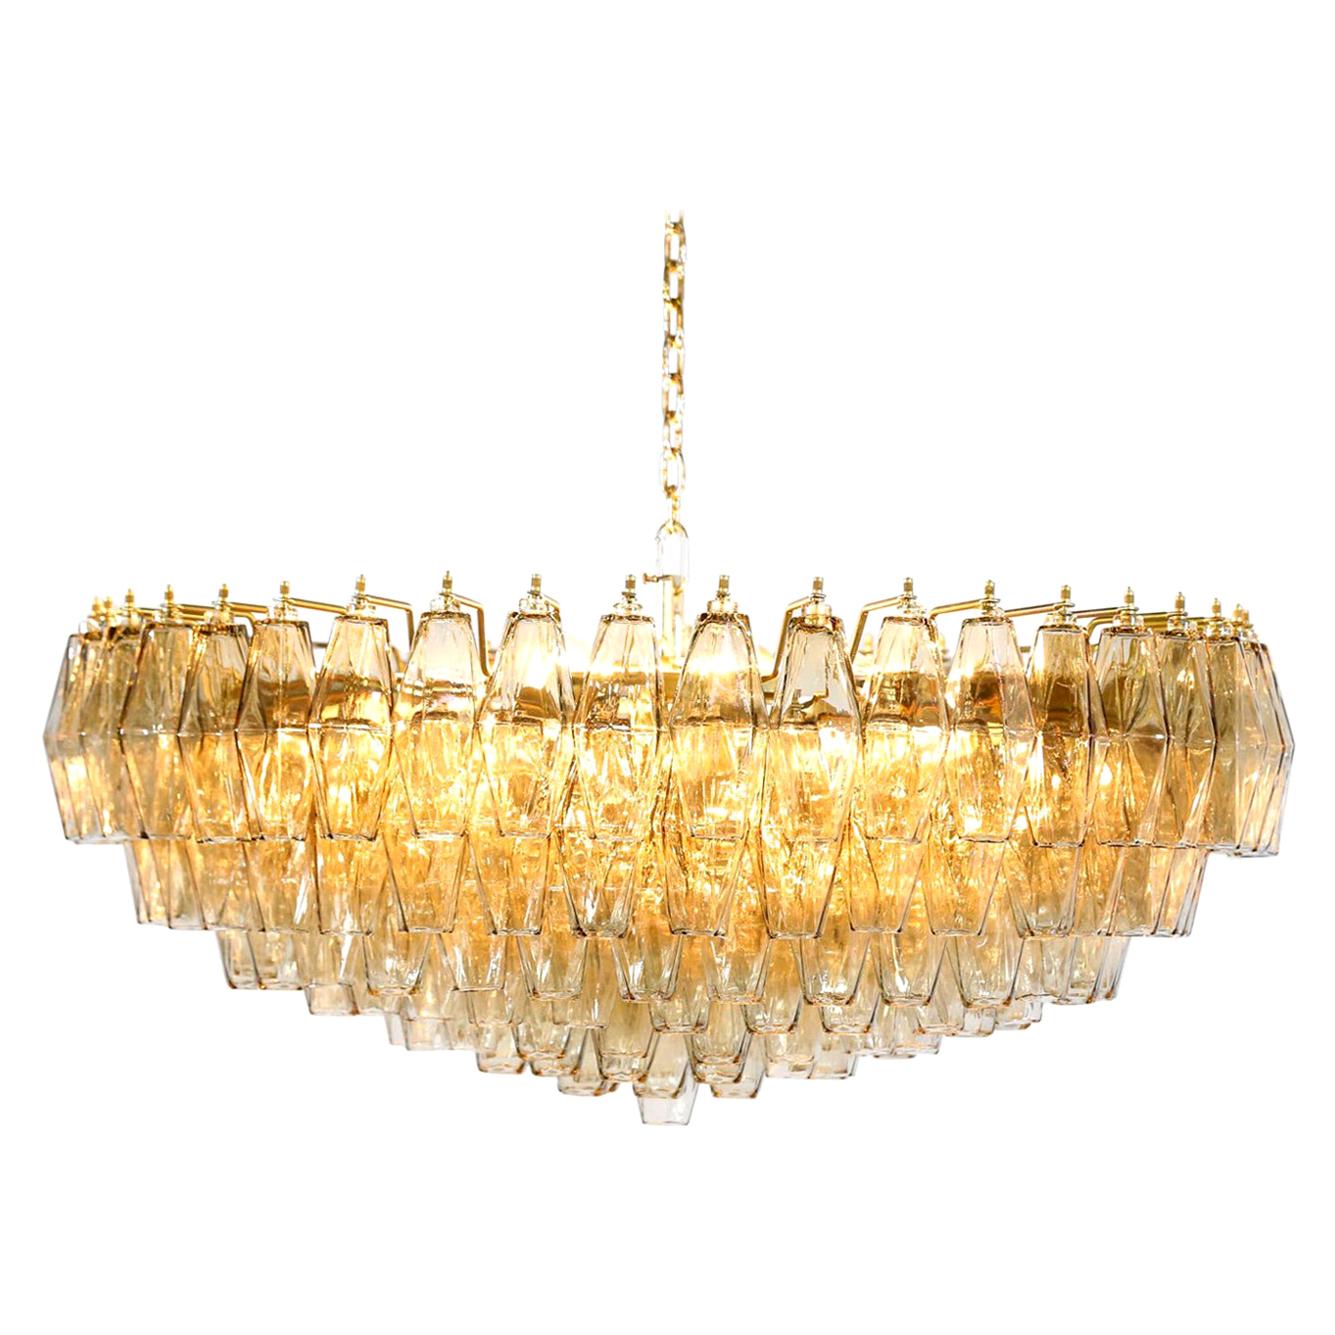 Large Italian Chandelier or Flushmount Polyhedral Murano Glass